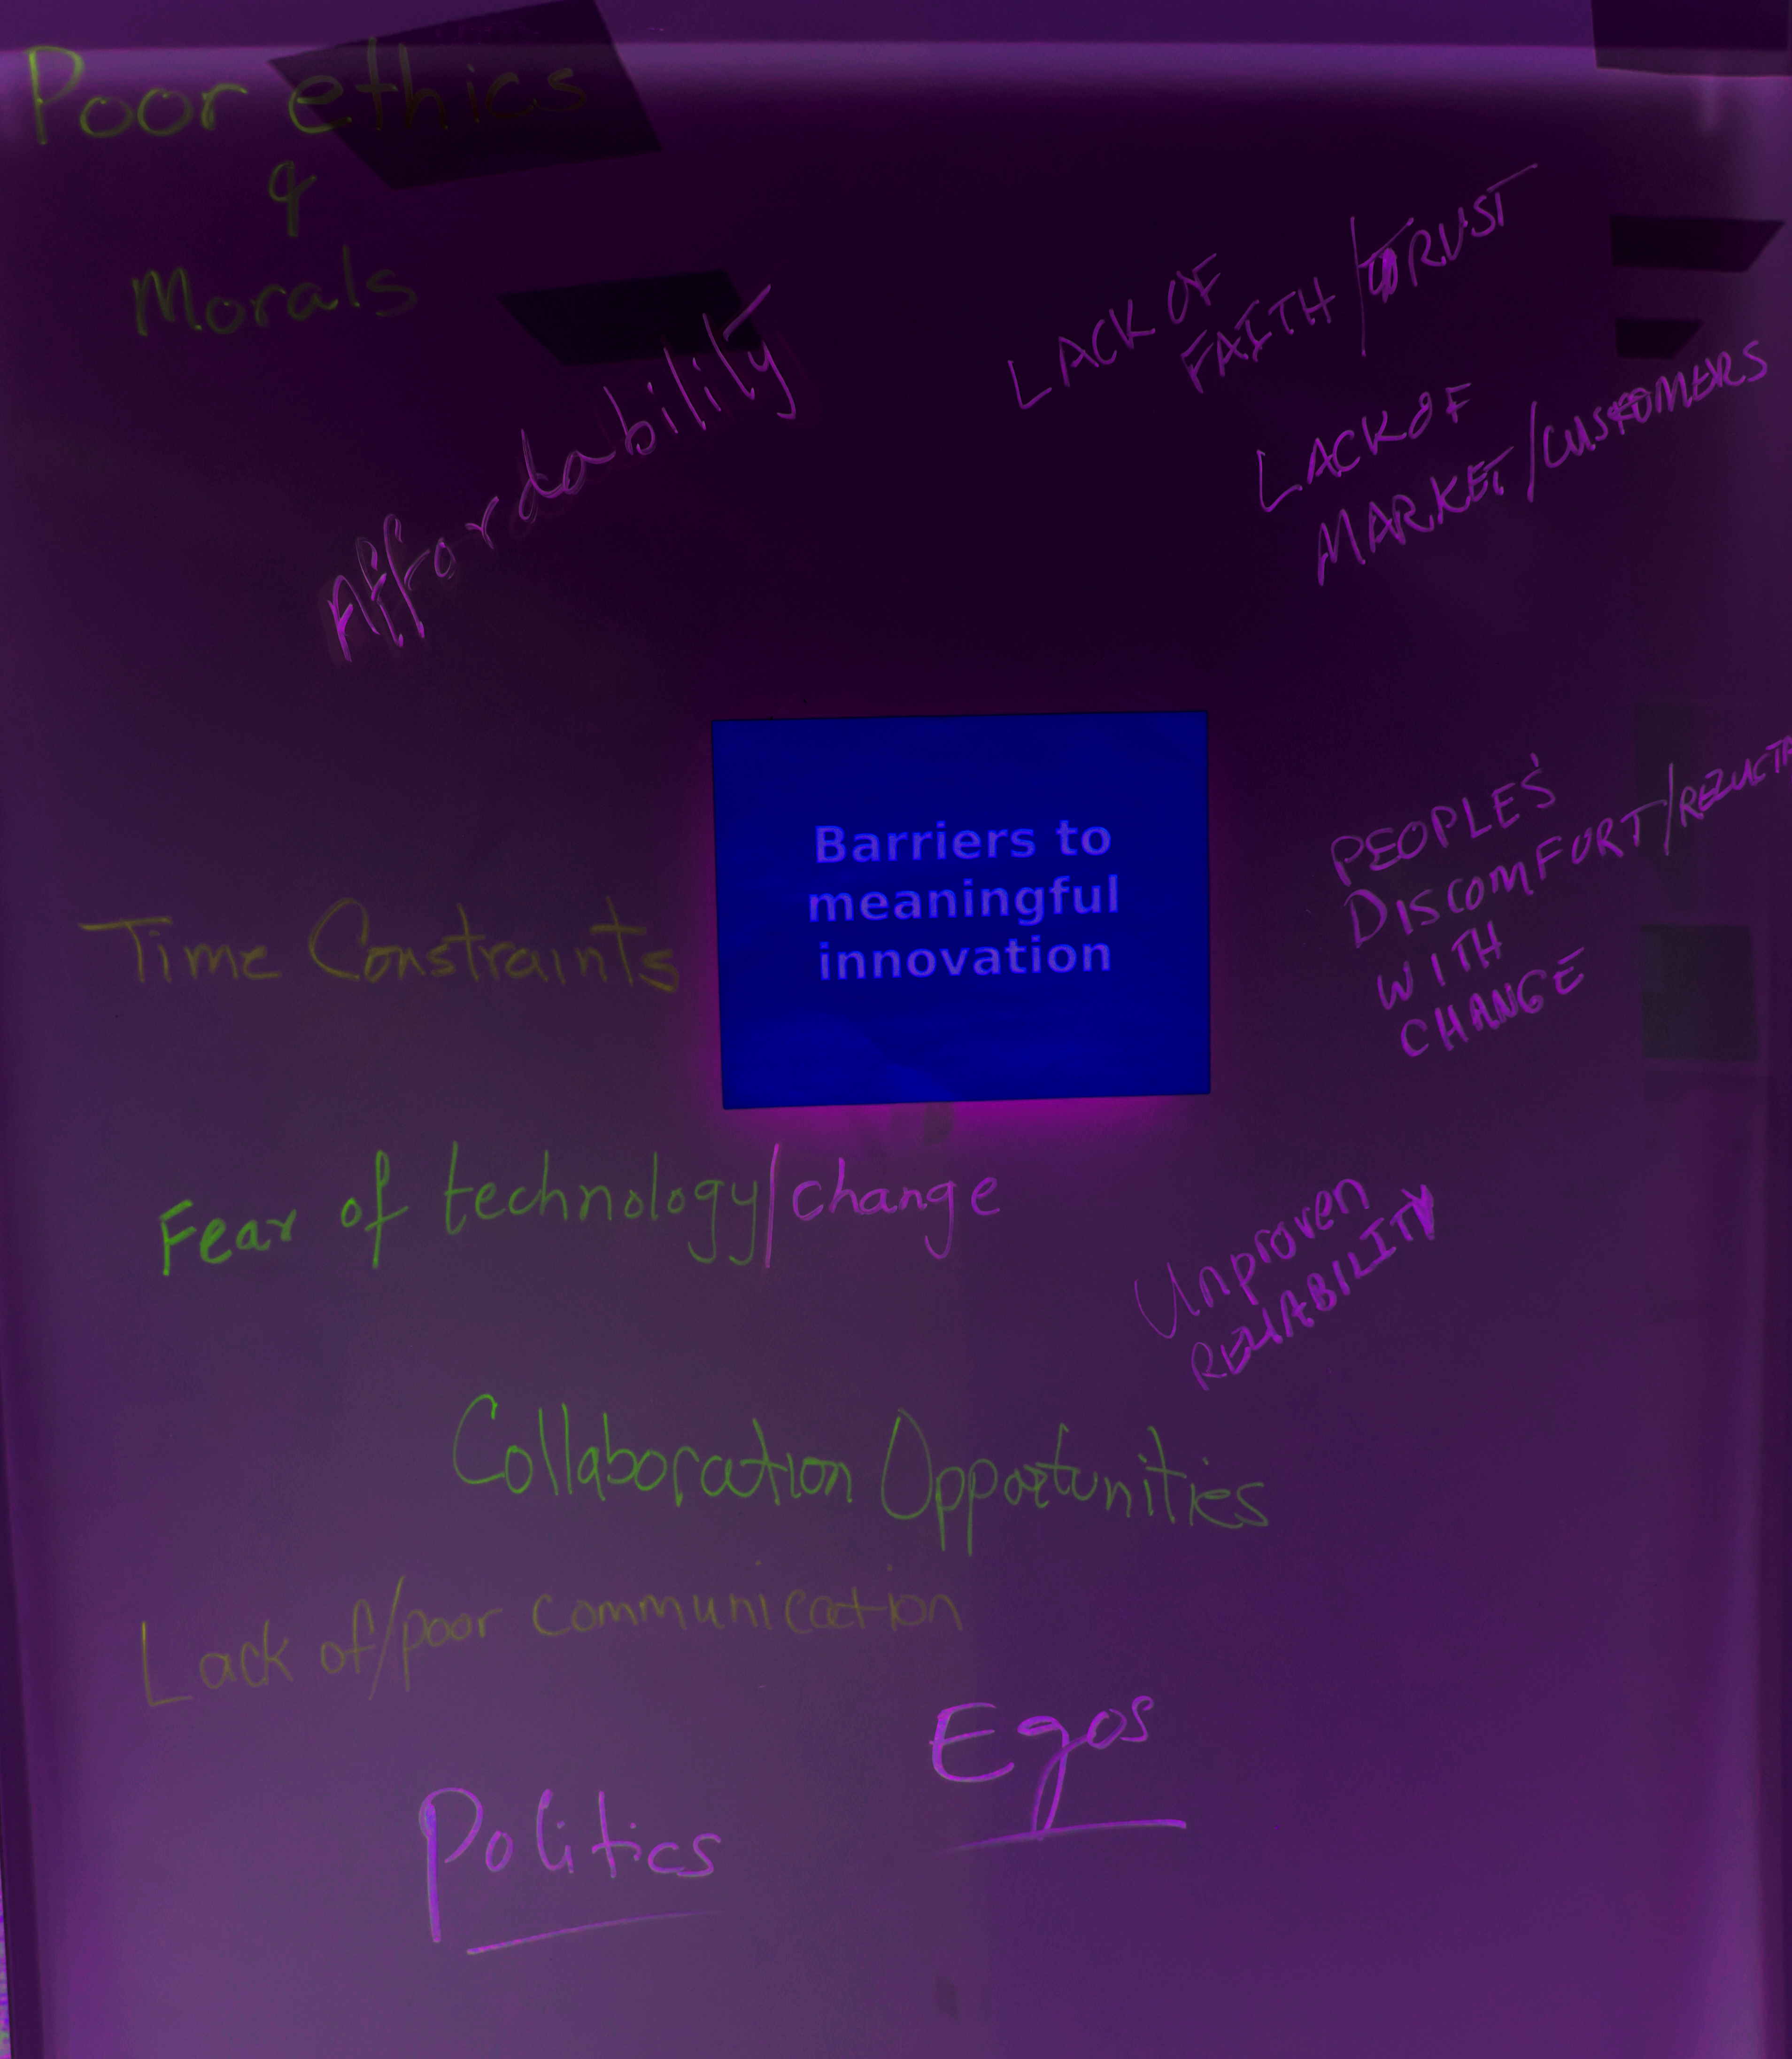 Mind-map ideas related to barriers to innovation contributed by guests